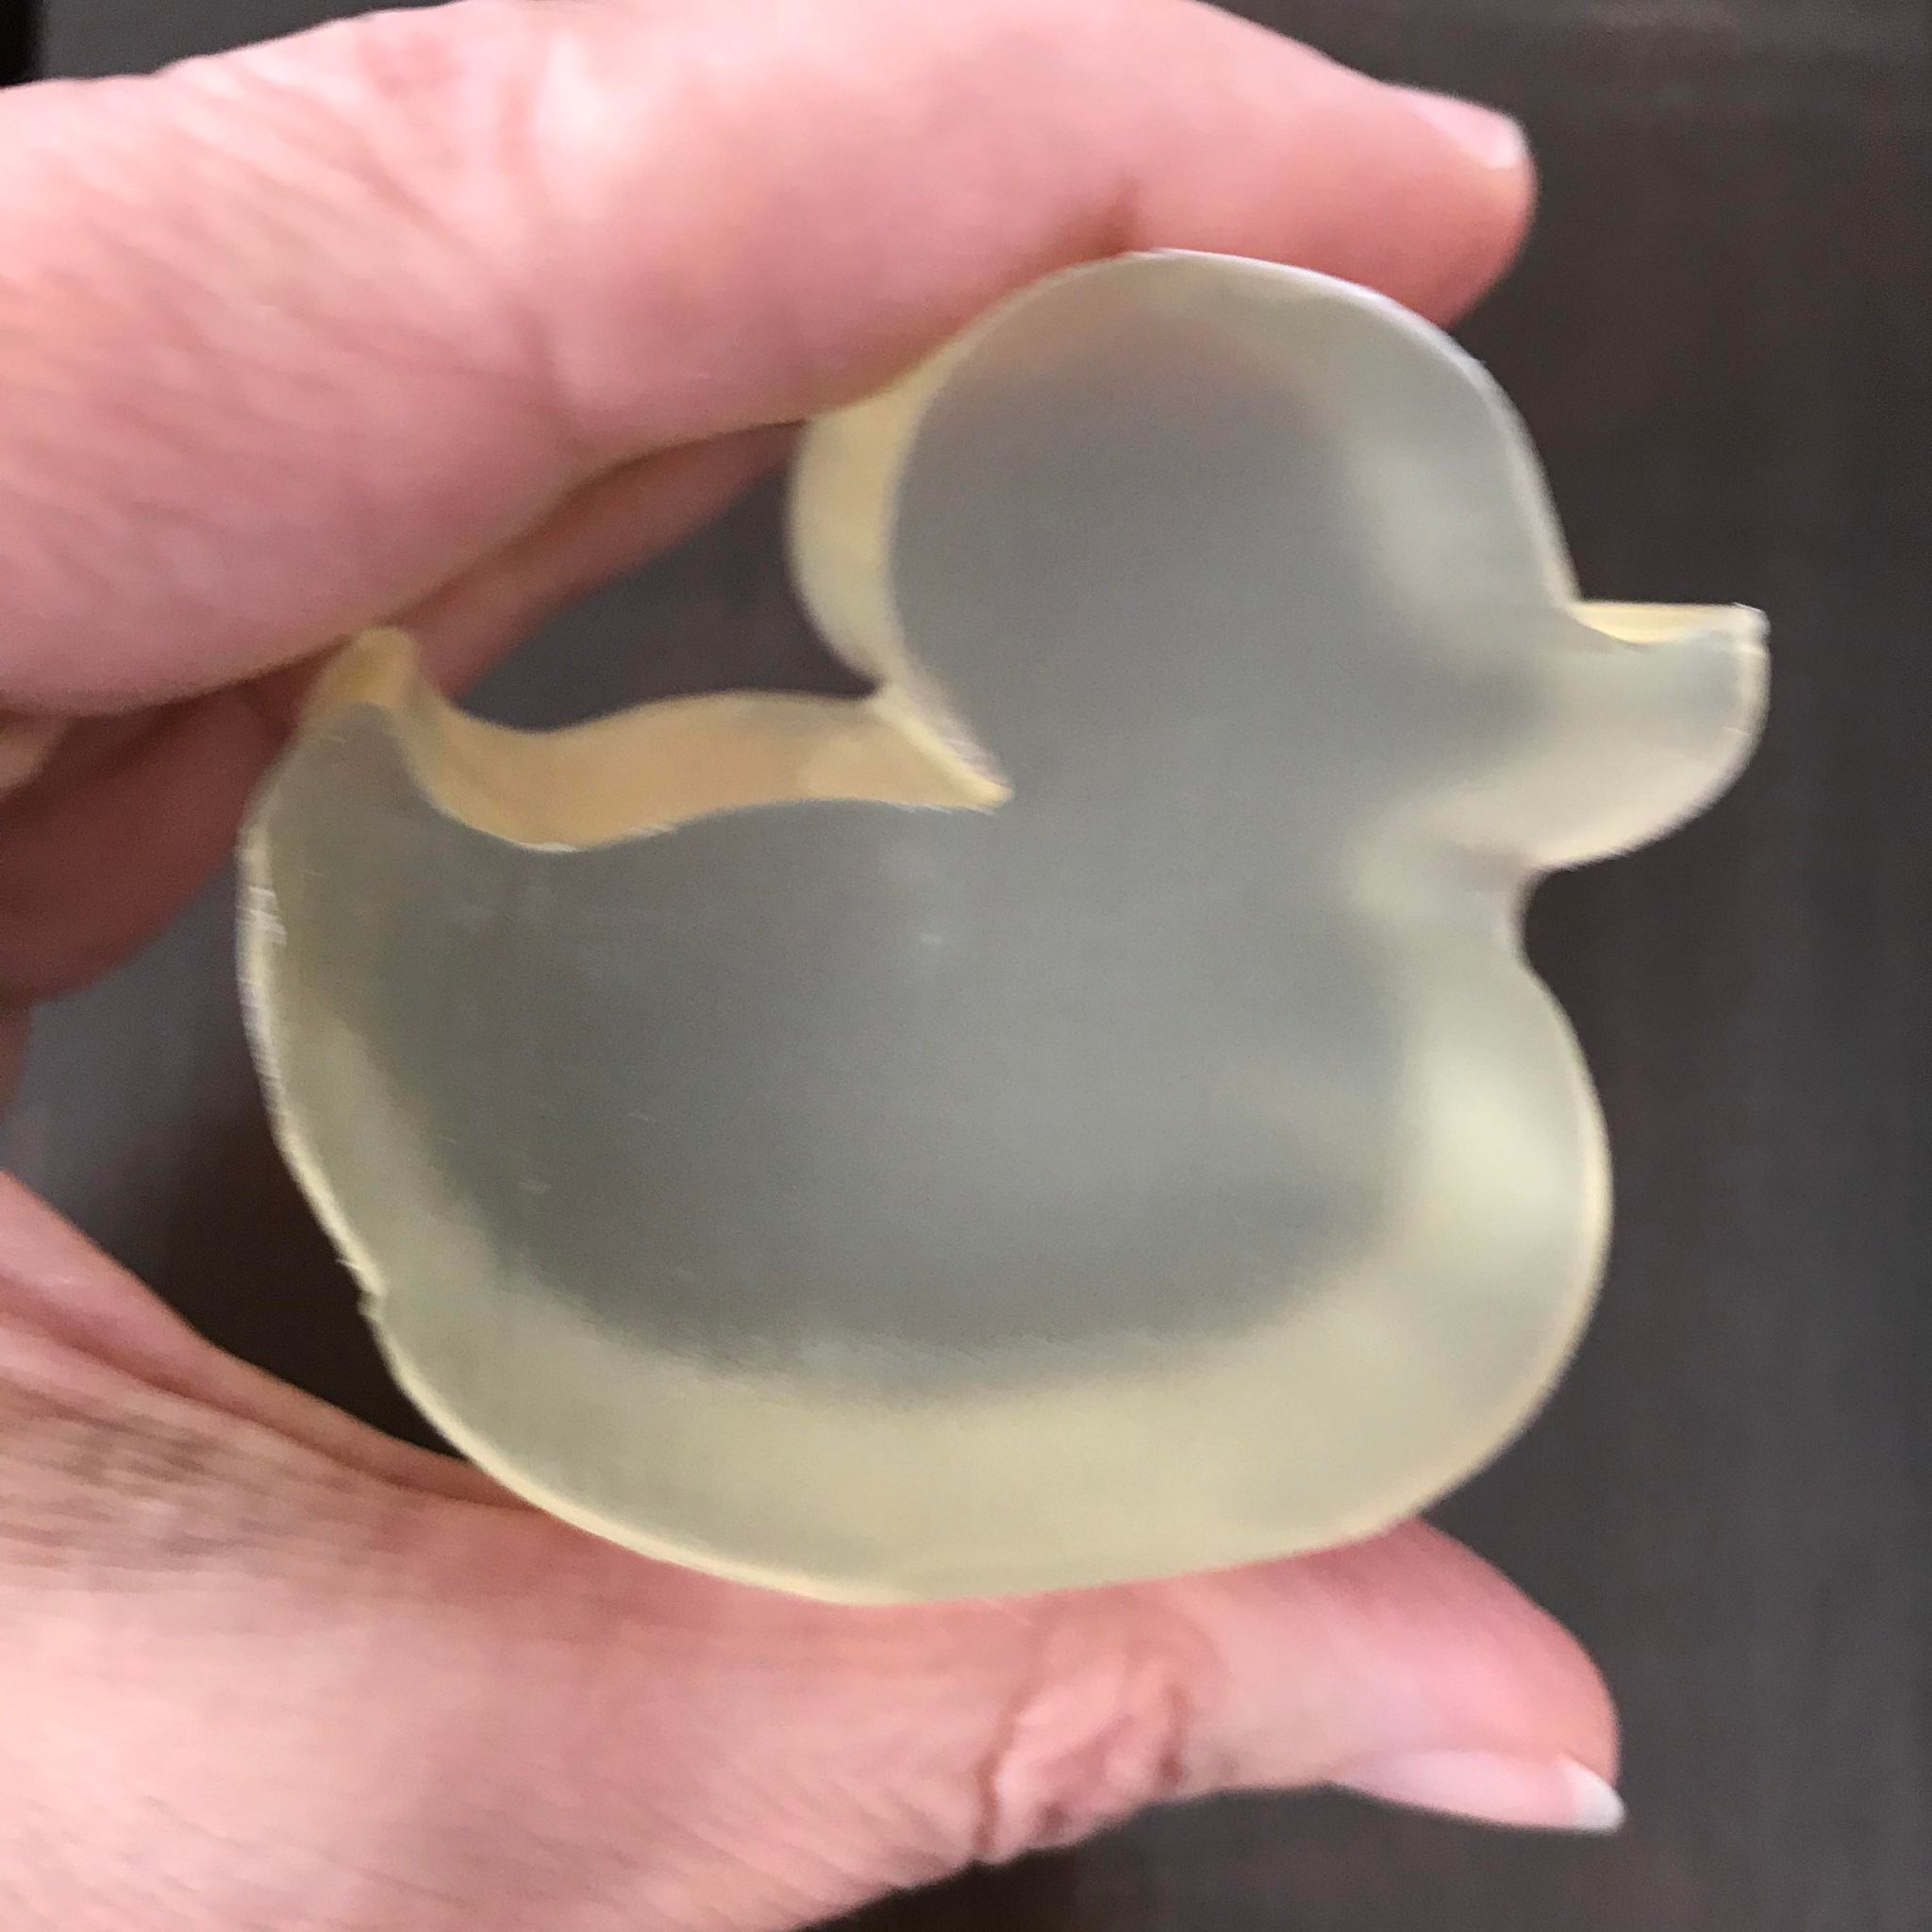 Vegan vegetable glycerin ducky soap made in Canada by Simply Natural Canada